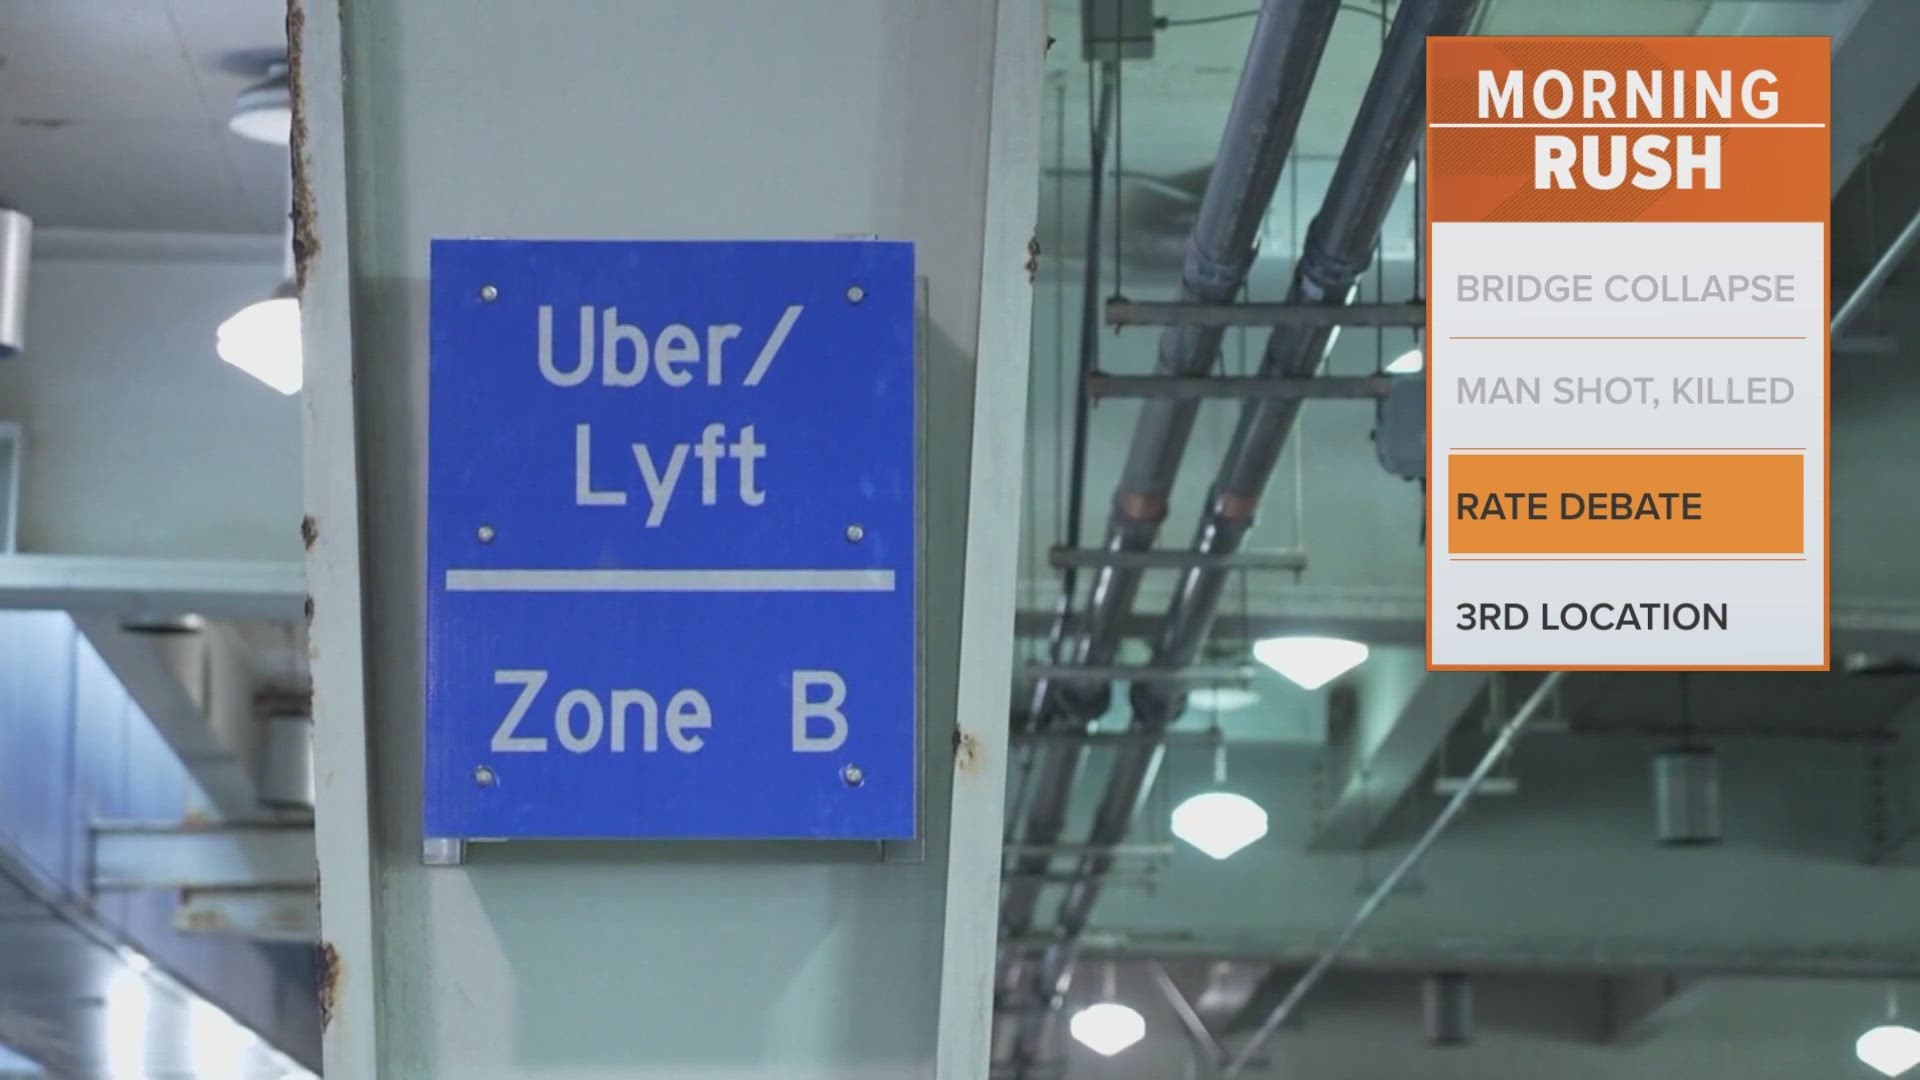 The city council voted to require rideshare companies to pay drivers a higher rate when within city limits.